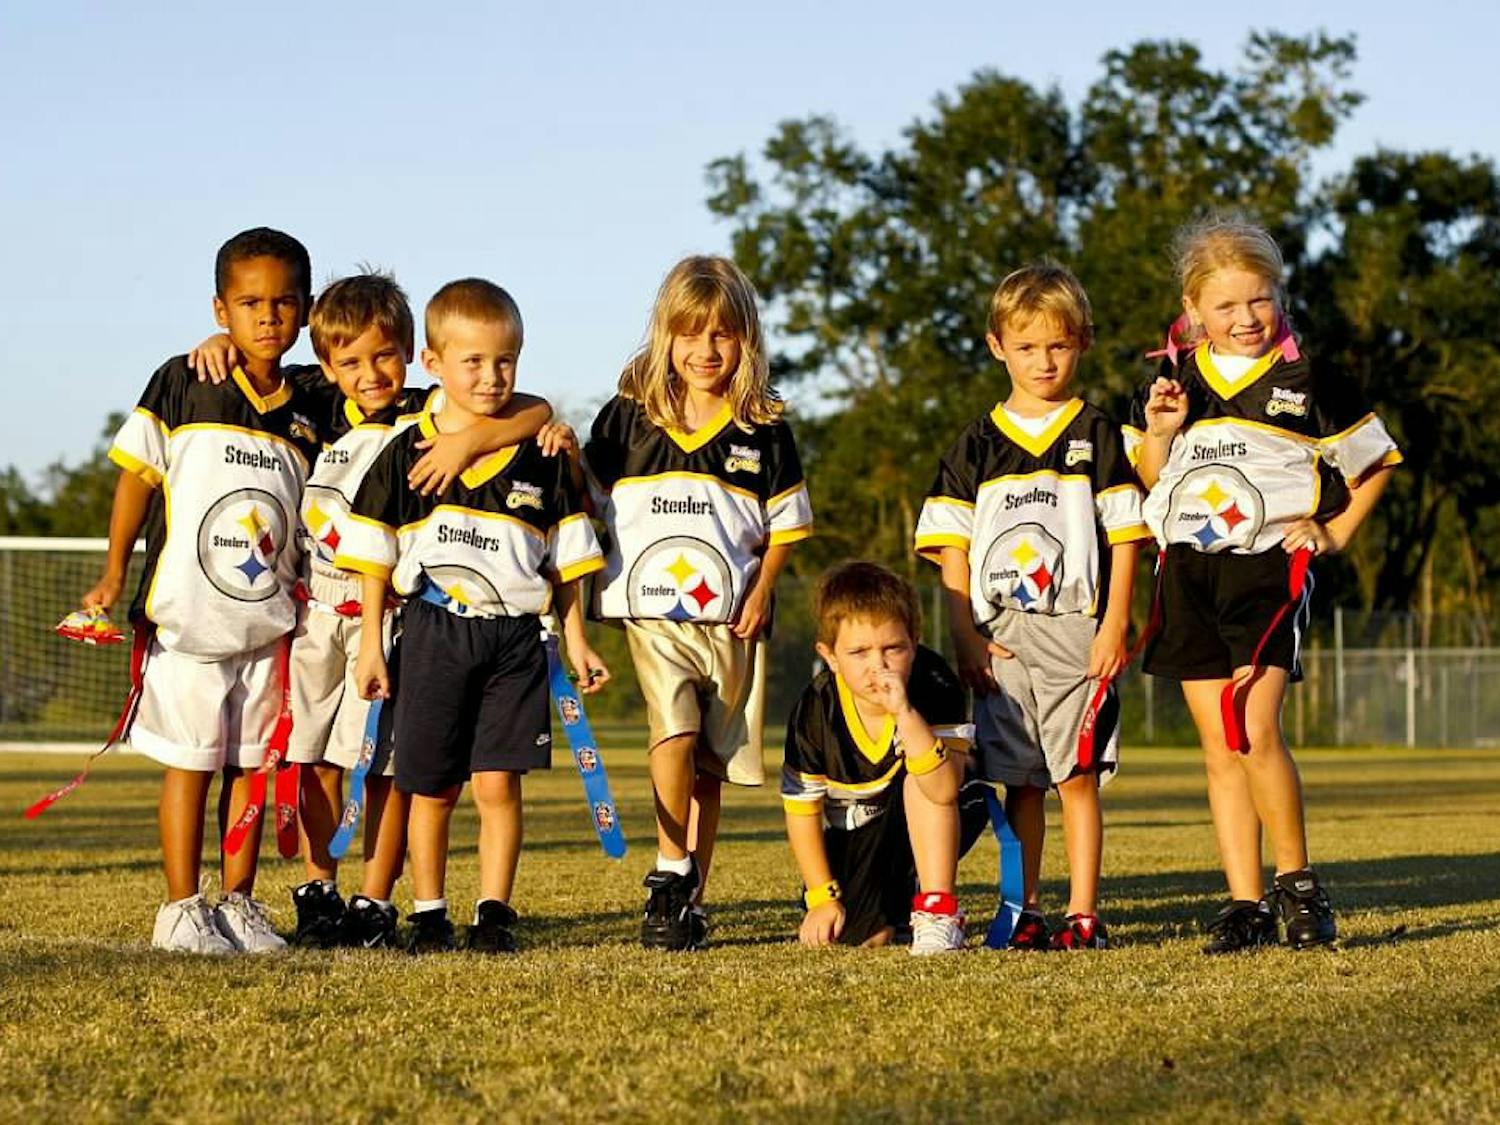 Gabriella Aulisio (center) poses with her flag football team, The Steelers, at the YMCA Sports Complex fields on Archer Road in 2008.